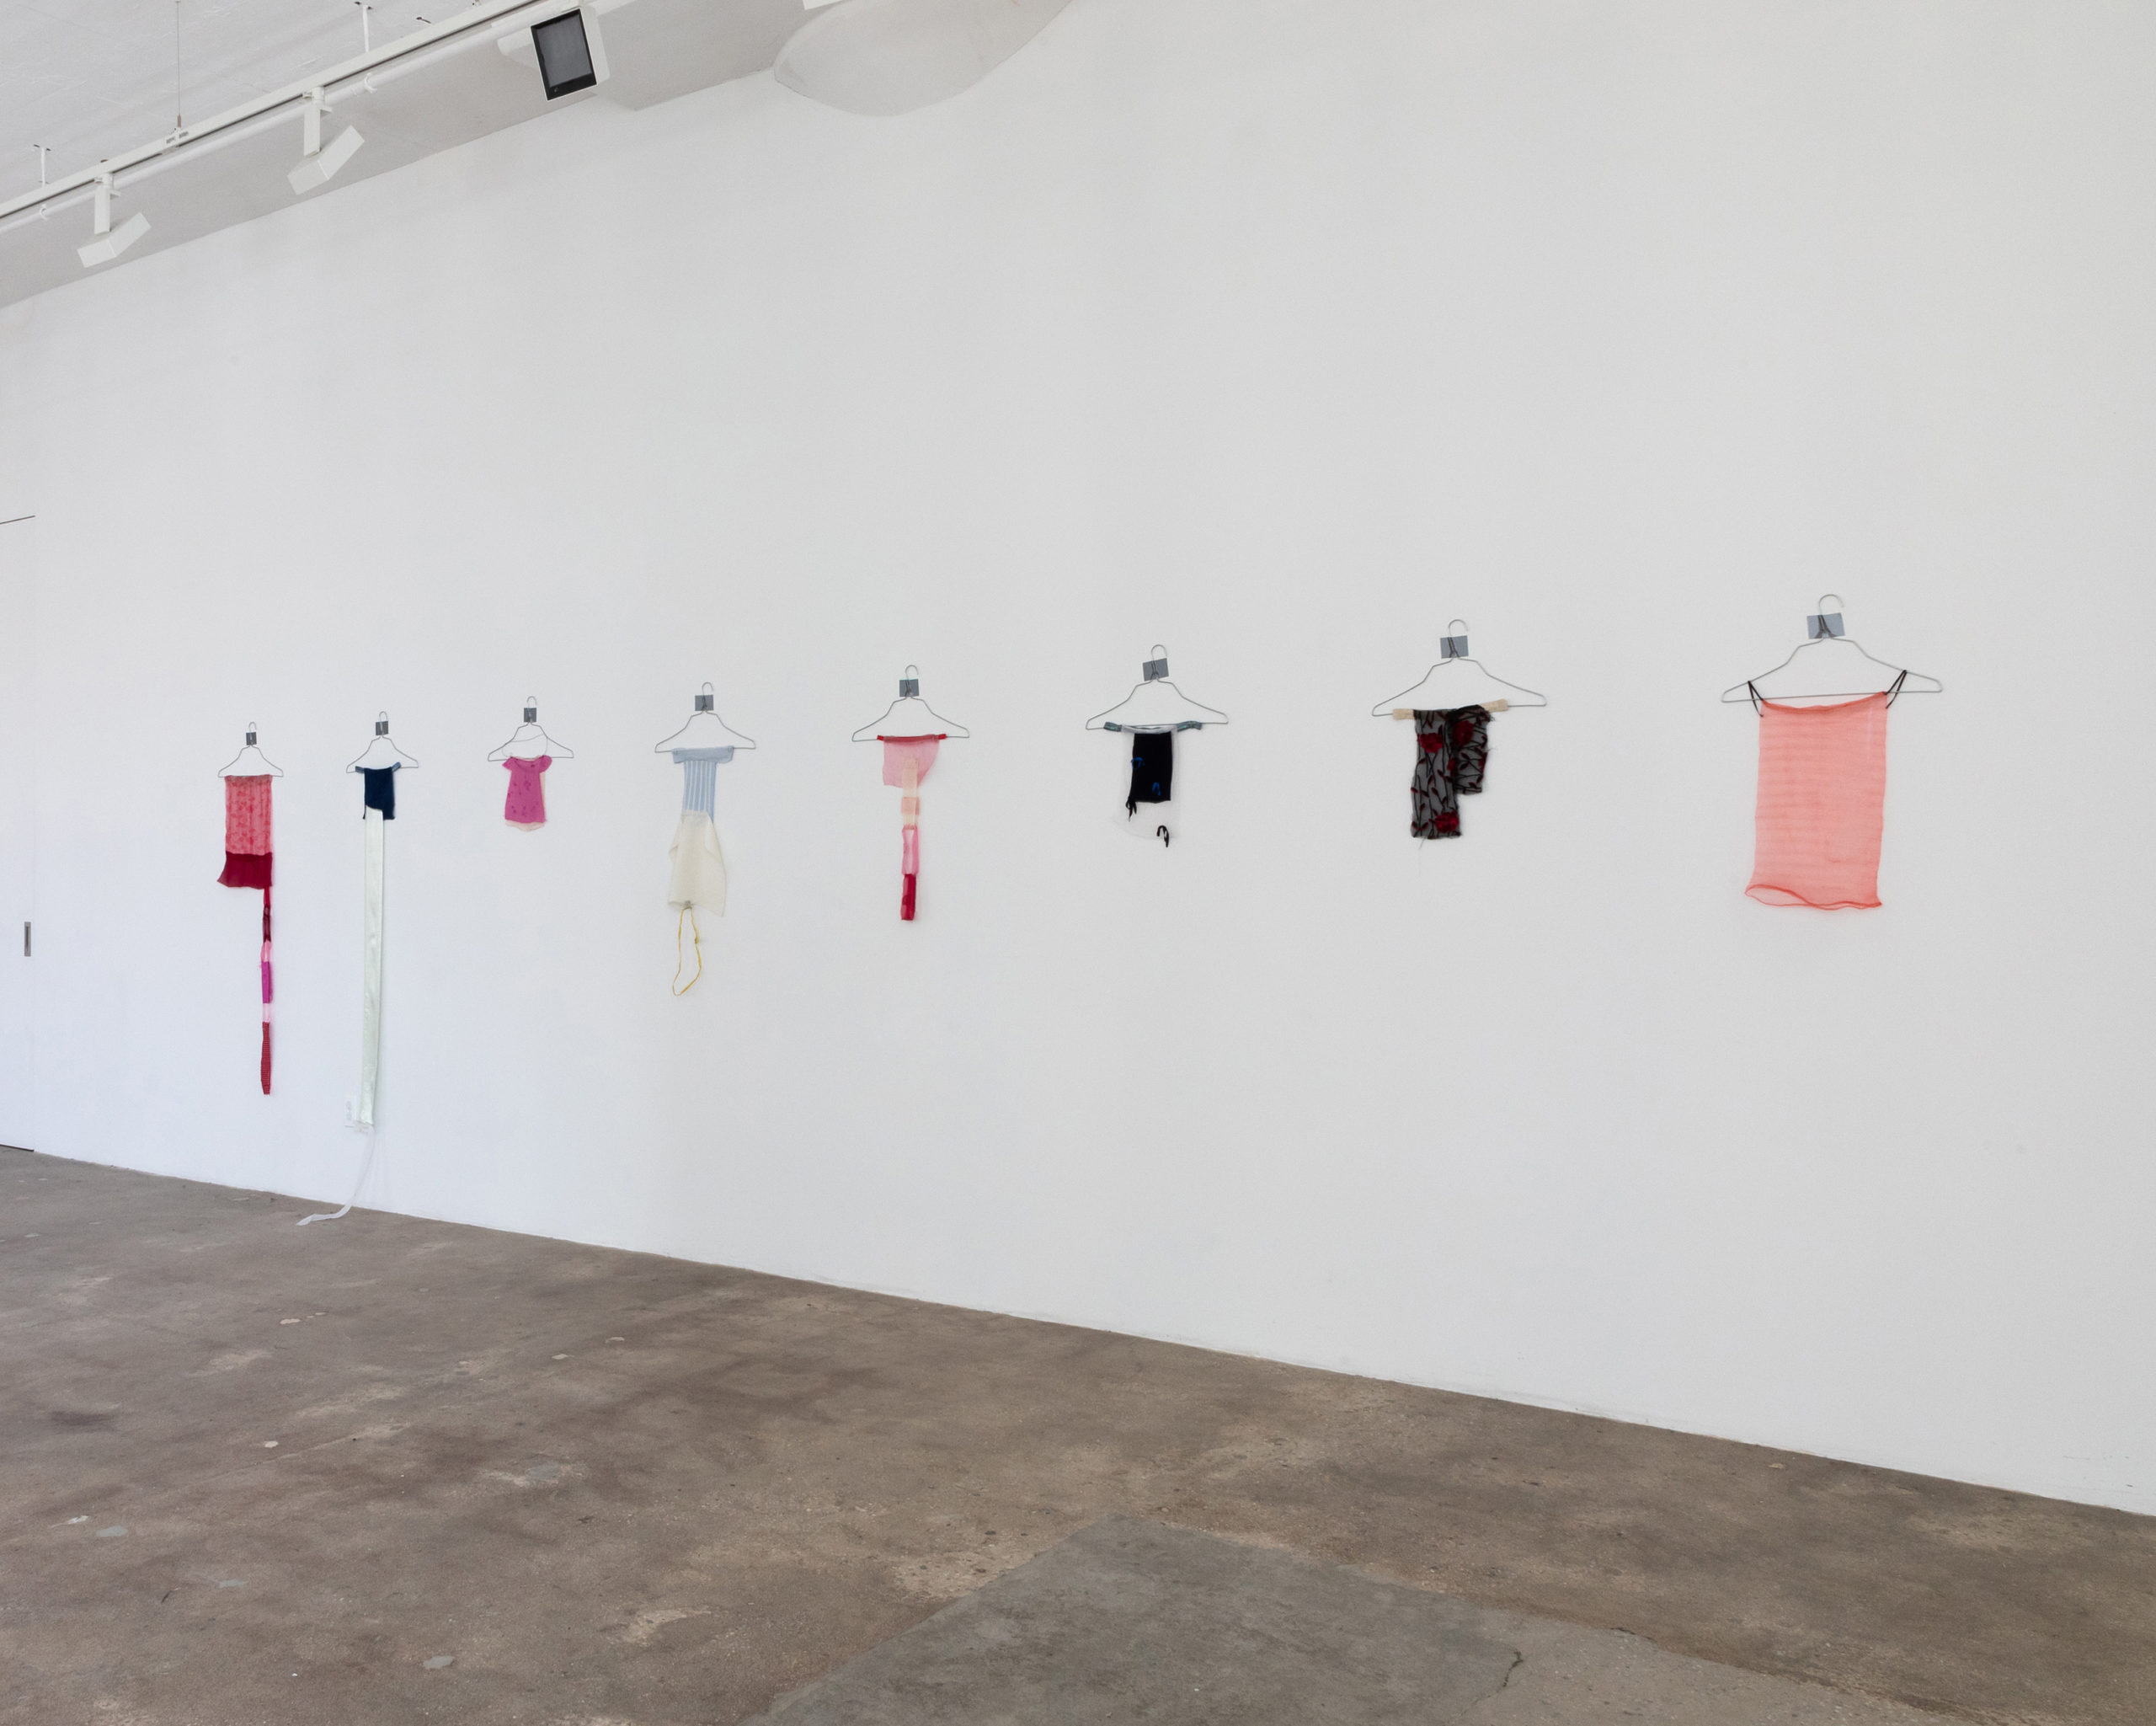 There are eight hangers on a plain white wall with tops and other pieces of fabric hanging on them.